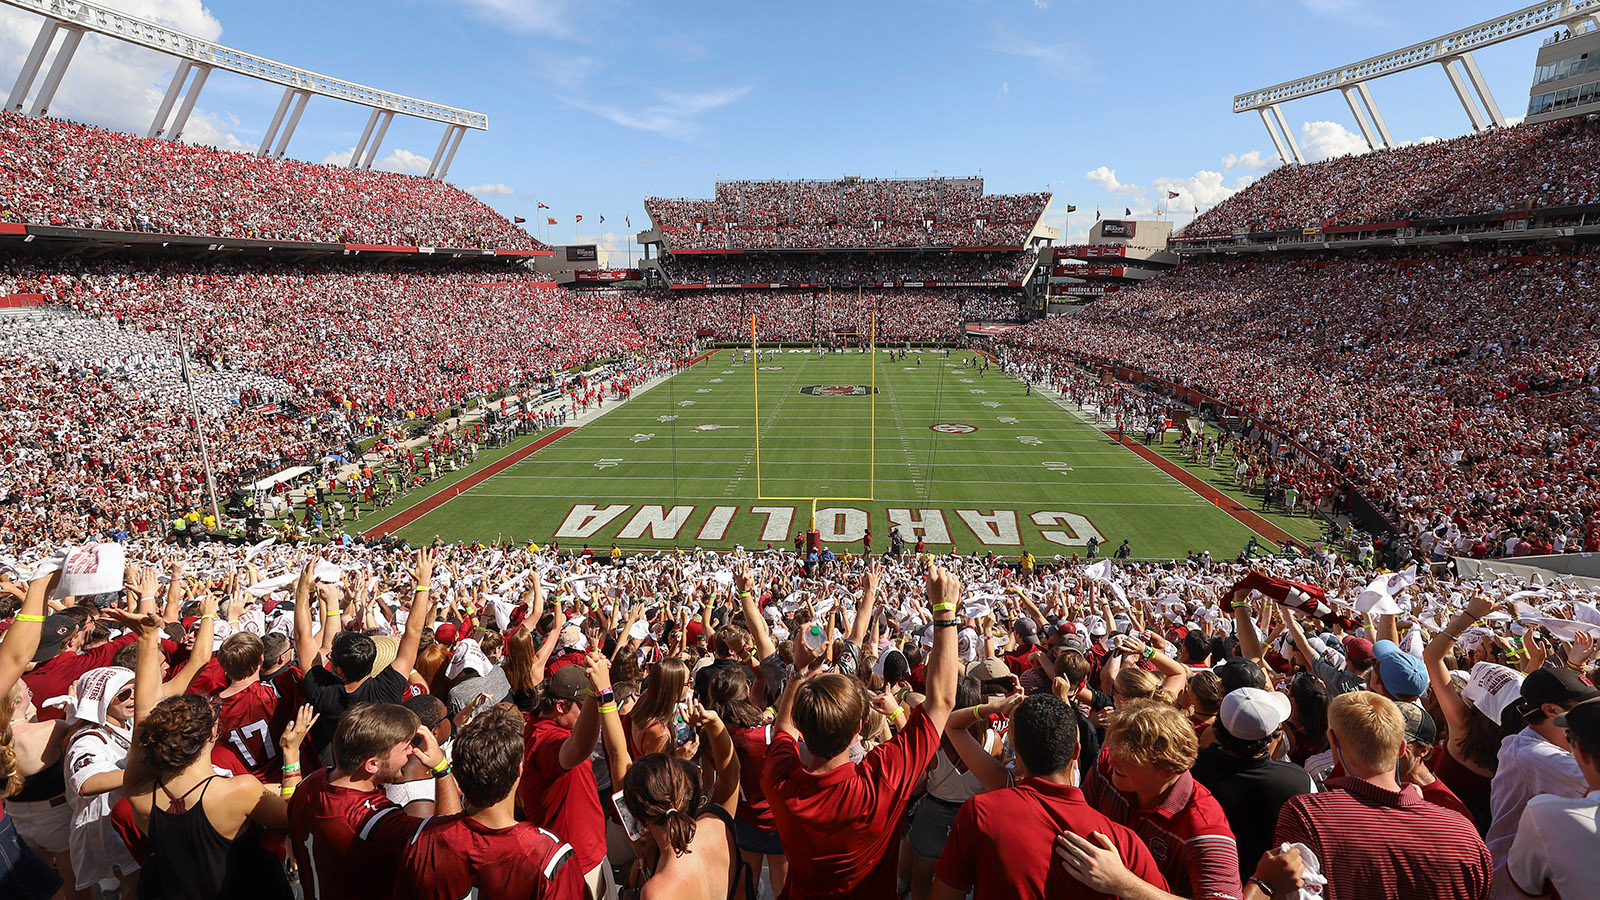 What's New for Fans at Williams-Brice Stadium